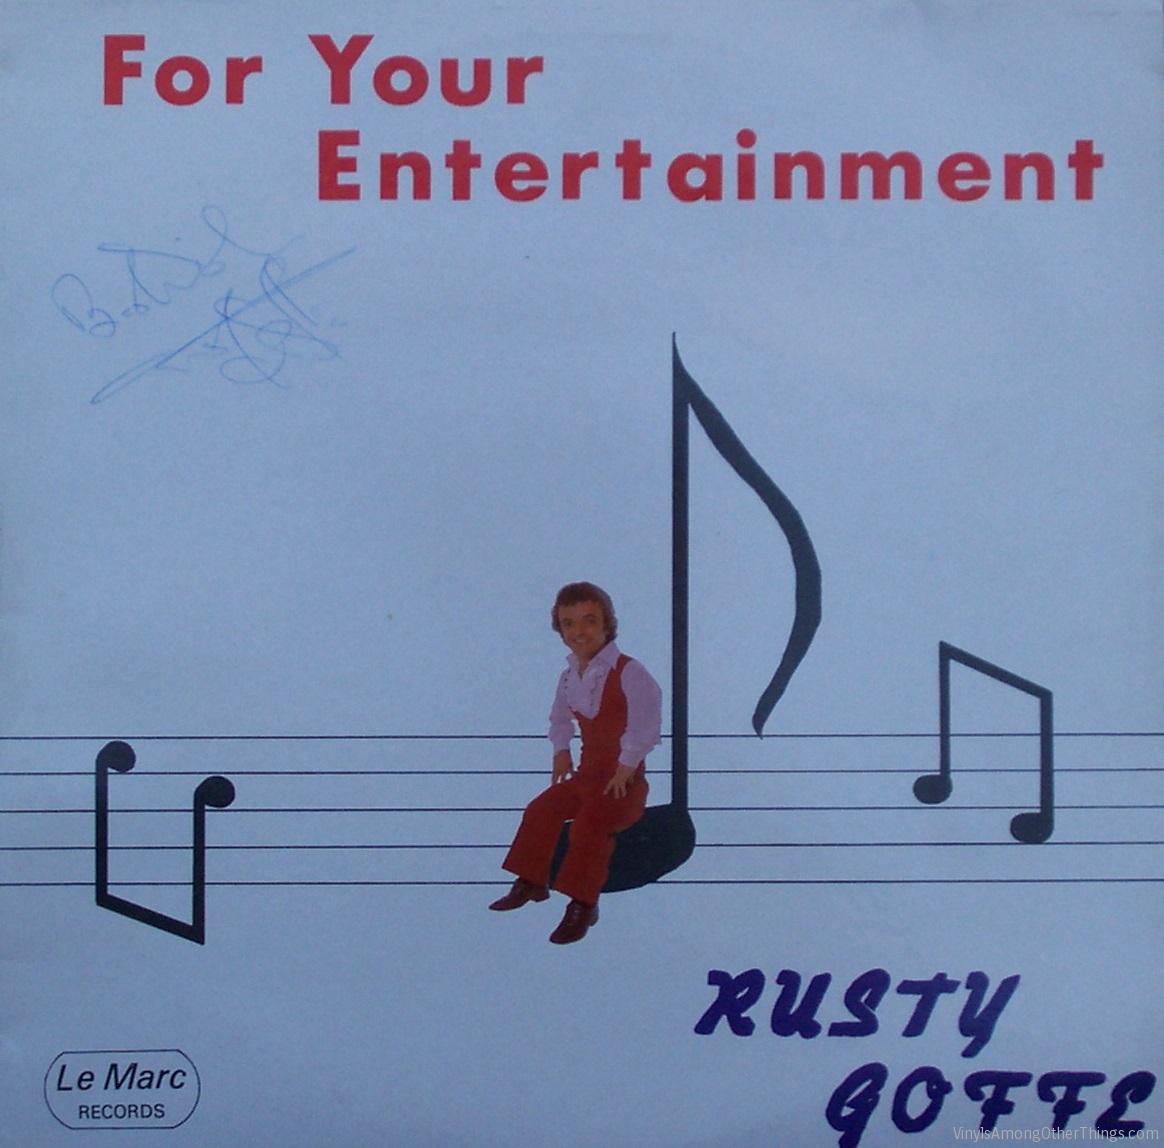 Rusty Goffe – “Rusty Goffe Sings and Plays for Your Entertainment”